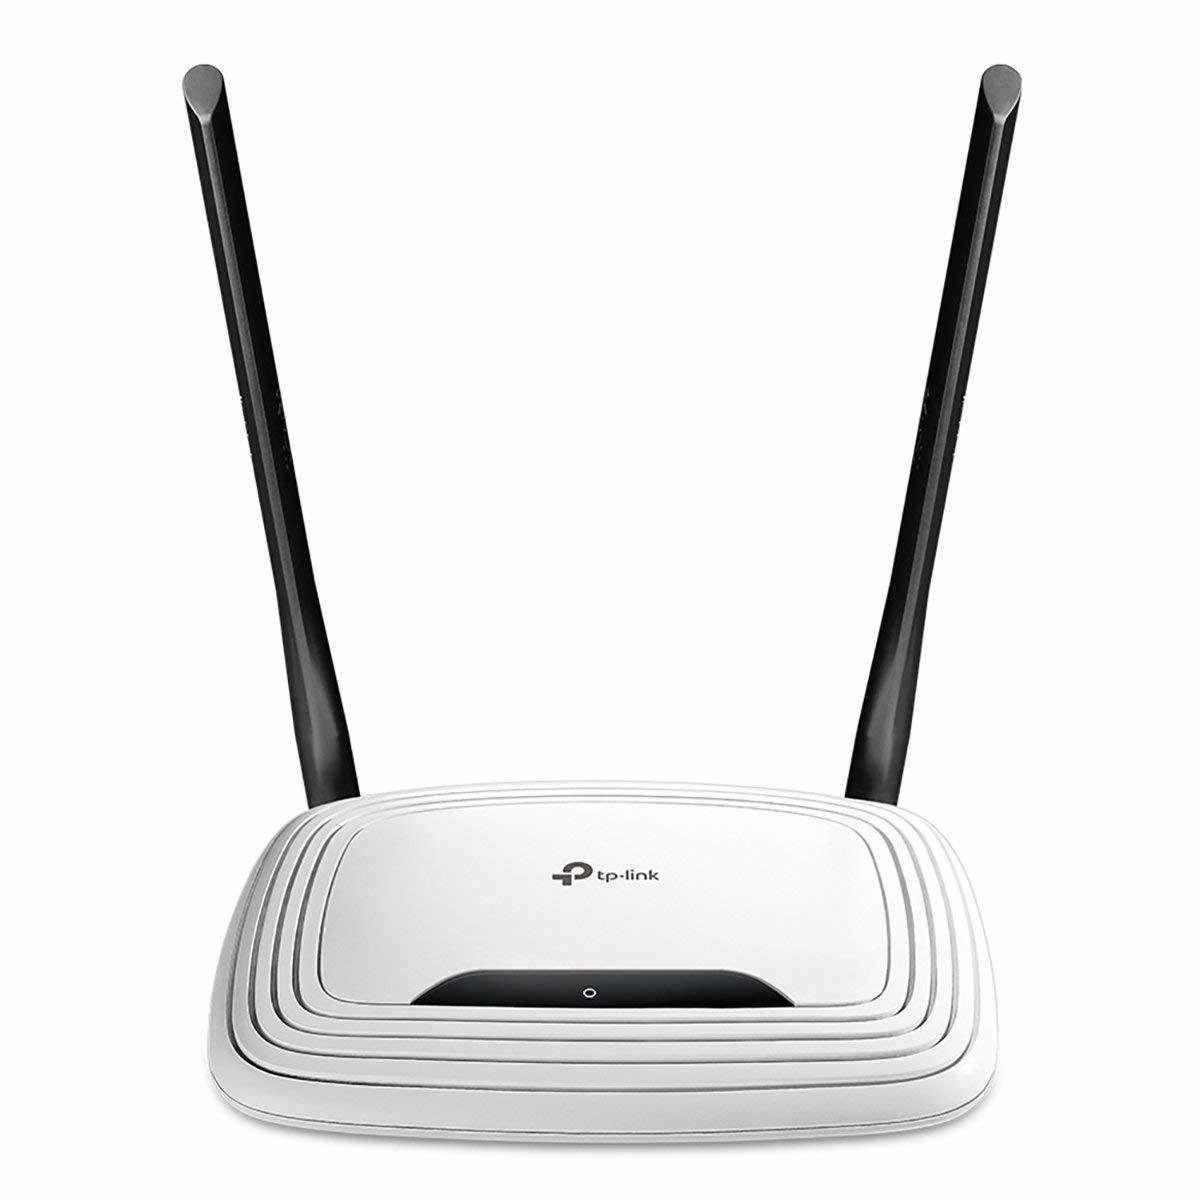 TP-Link TL-WR841N 300Mbps Wireless-N Router, Rs.855